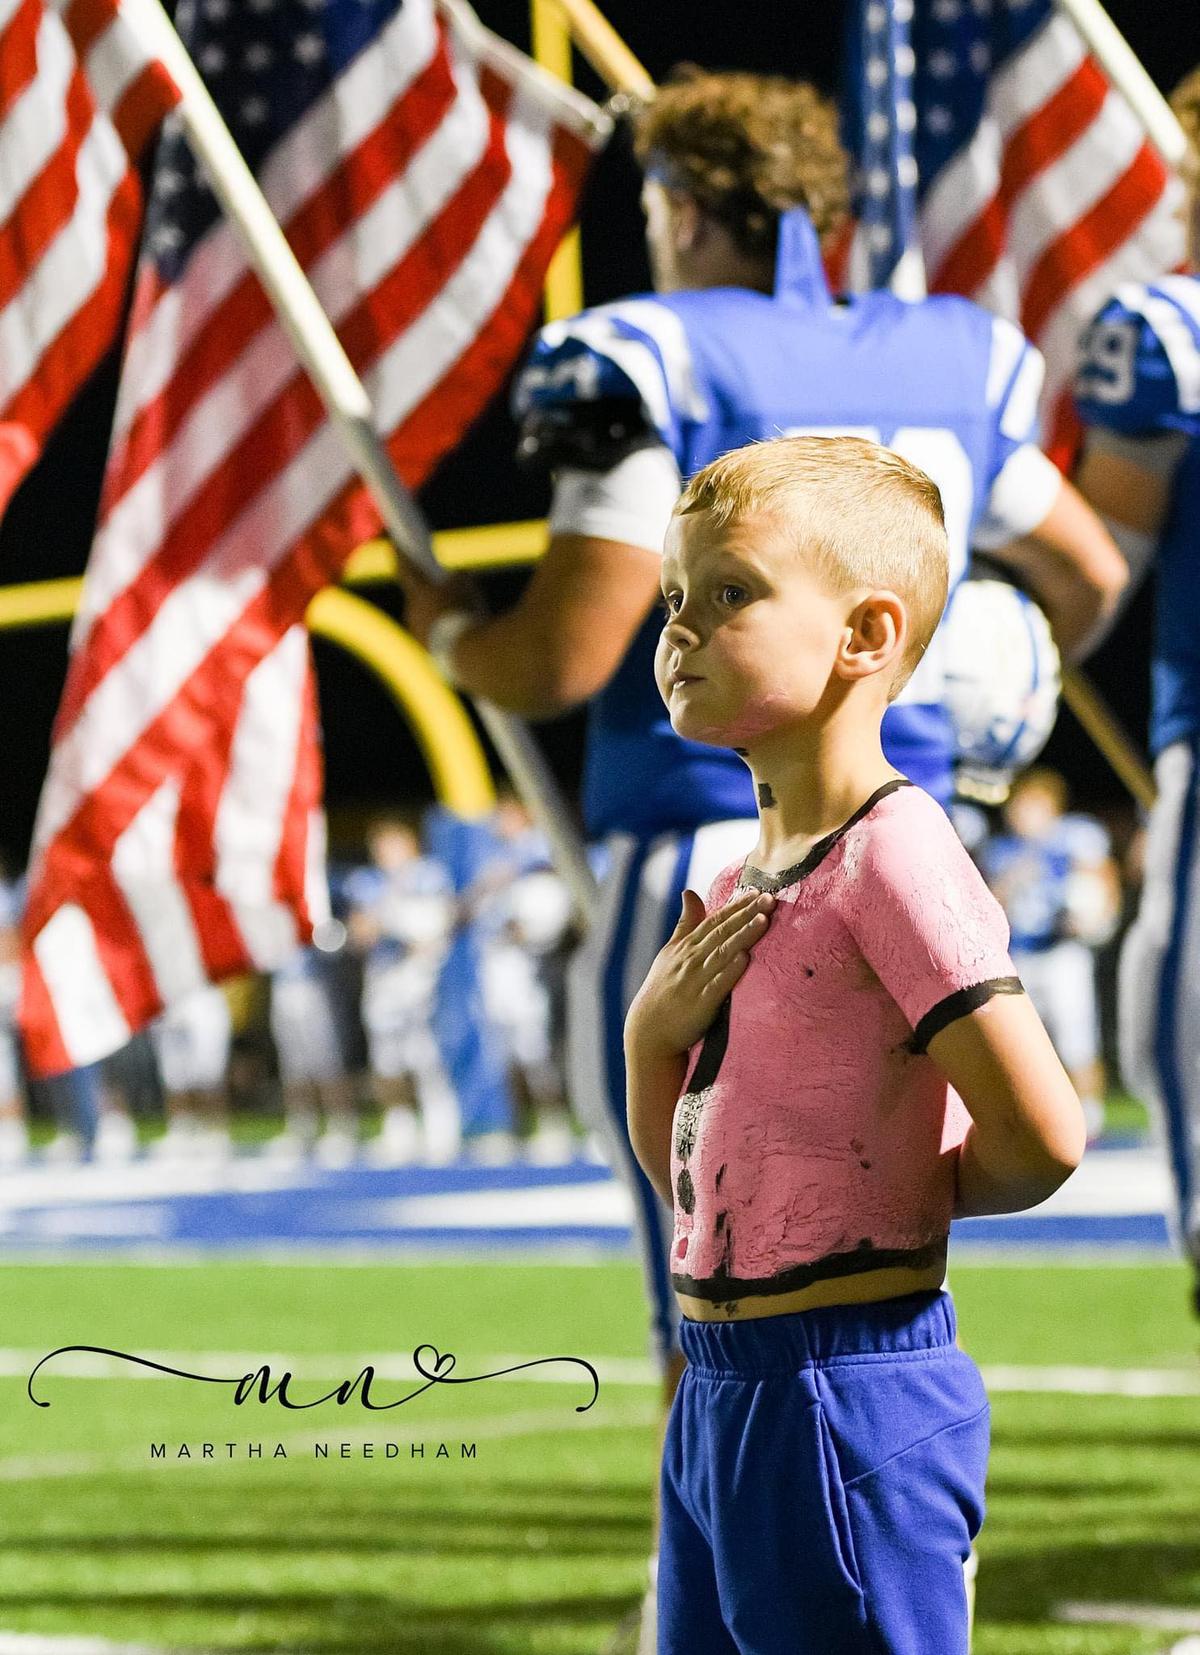 Cooper Routon of Arab, Alabama, was captured saluting the American flag at a local football game. (Courtesy of <a href="https://www.facebook.com/martha.e.needham">Martha Needham</a>)